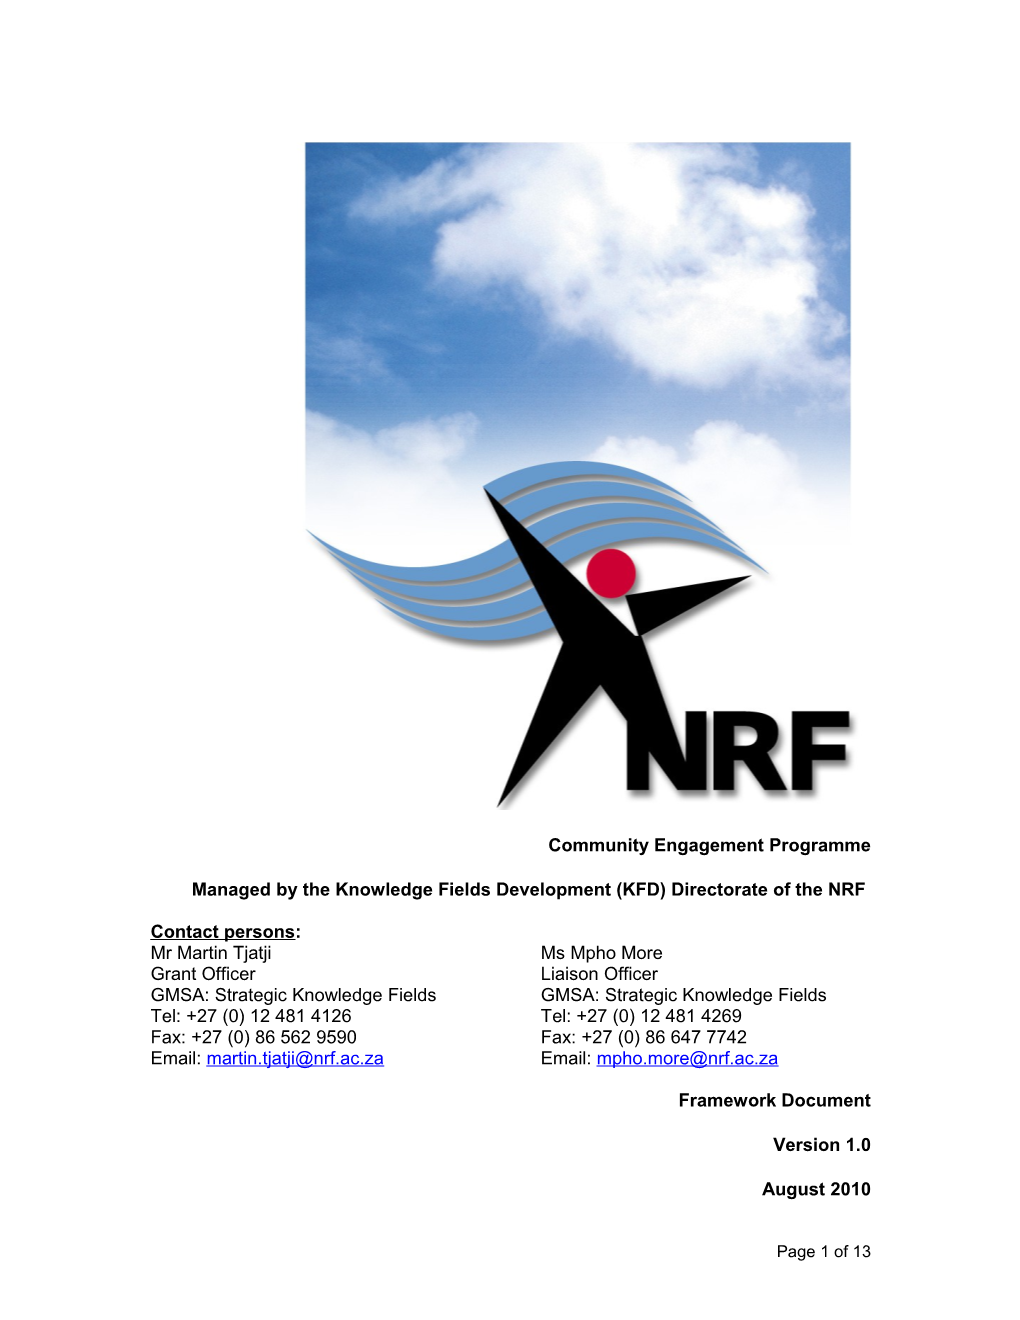 Managed by the Knowledge Fields Development (KFD) Directorate of the NRF